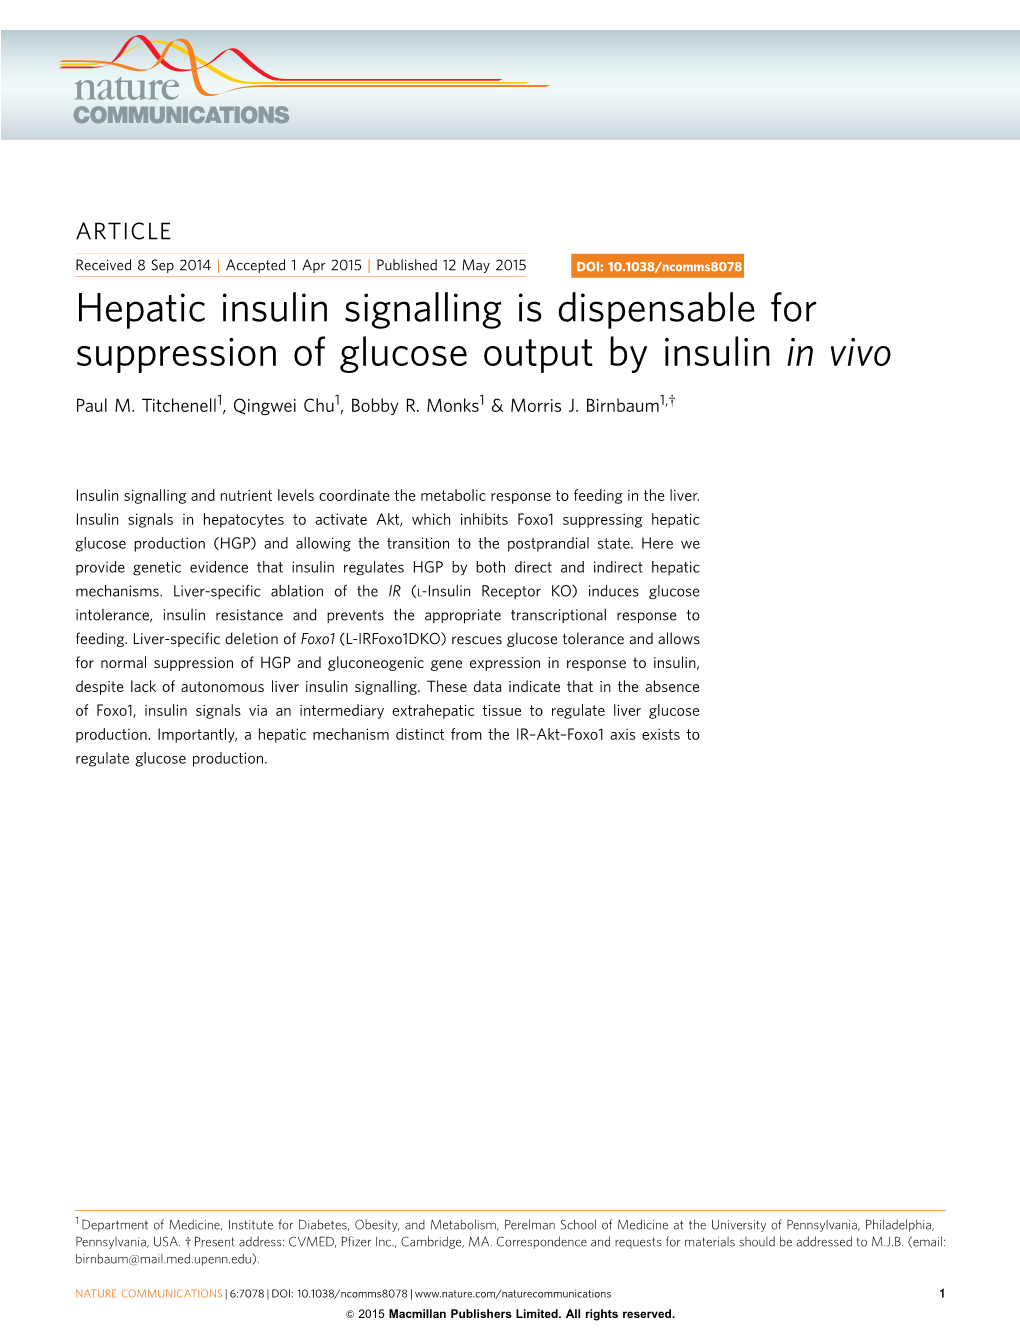 Hepatic Insulin Signalling Is Dispensable for Suppression of Glucose Output by Insulin in Vivo